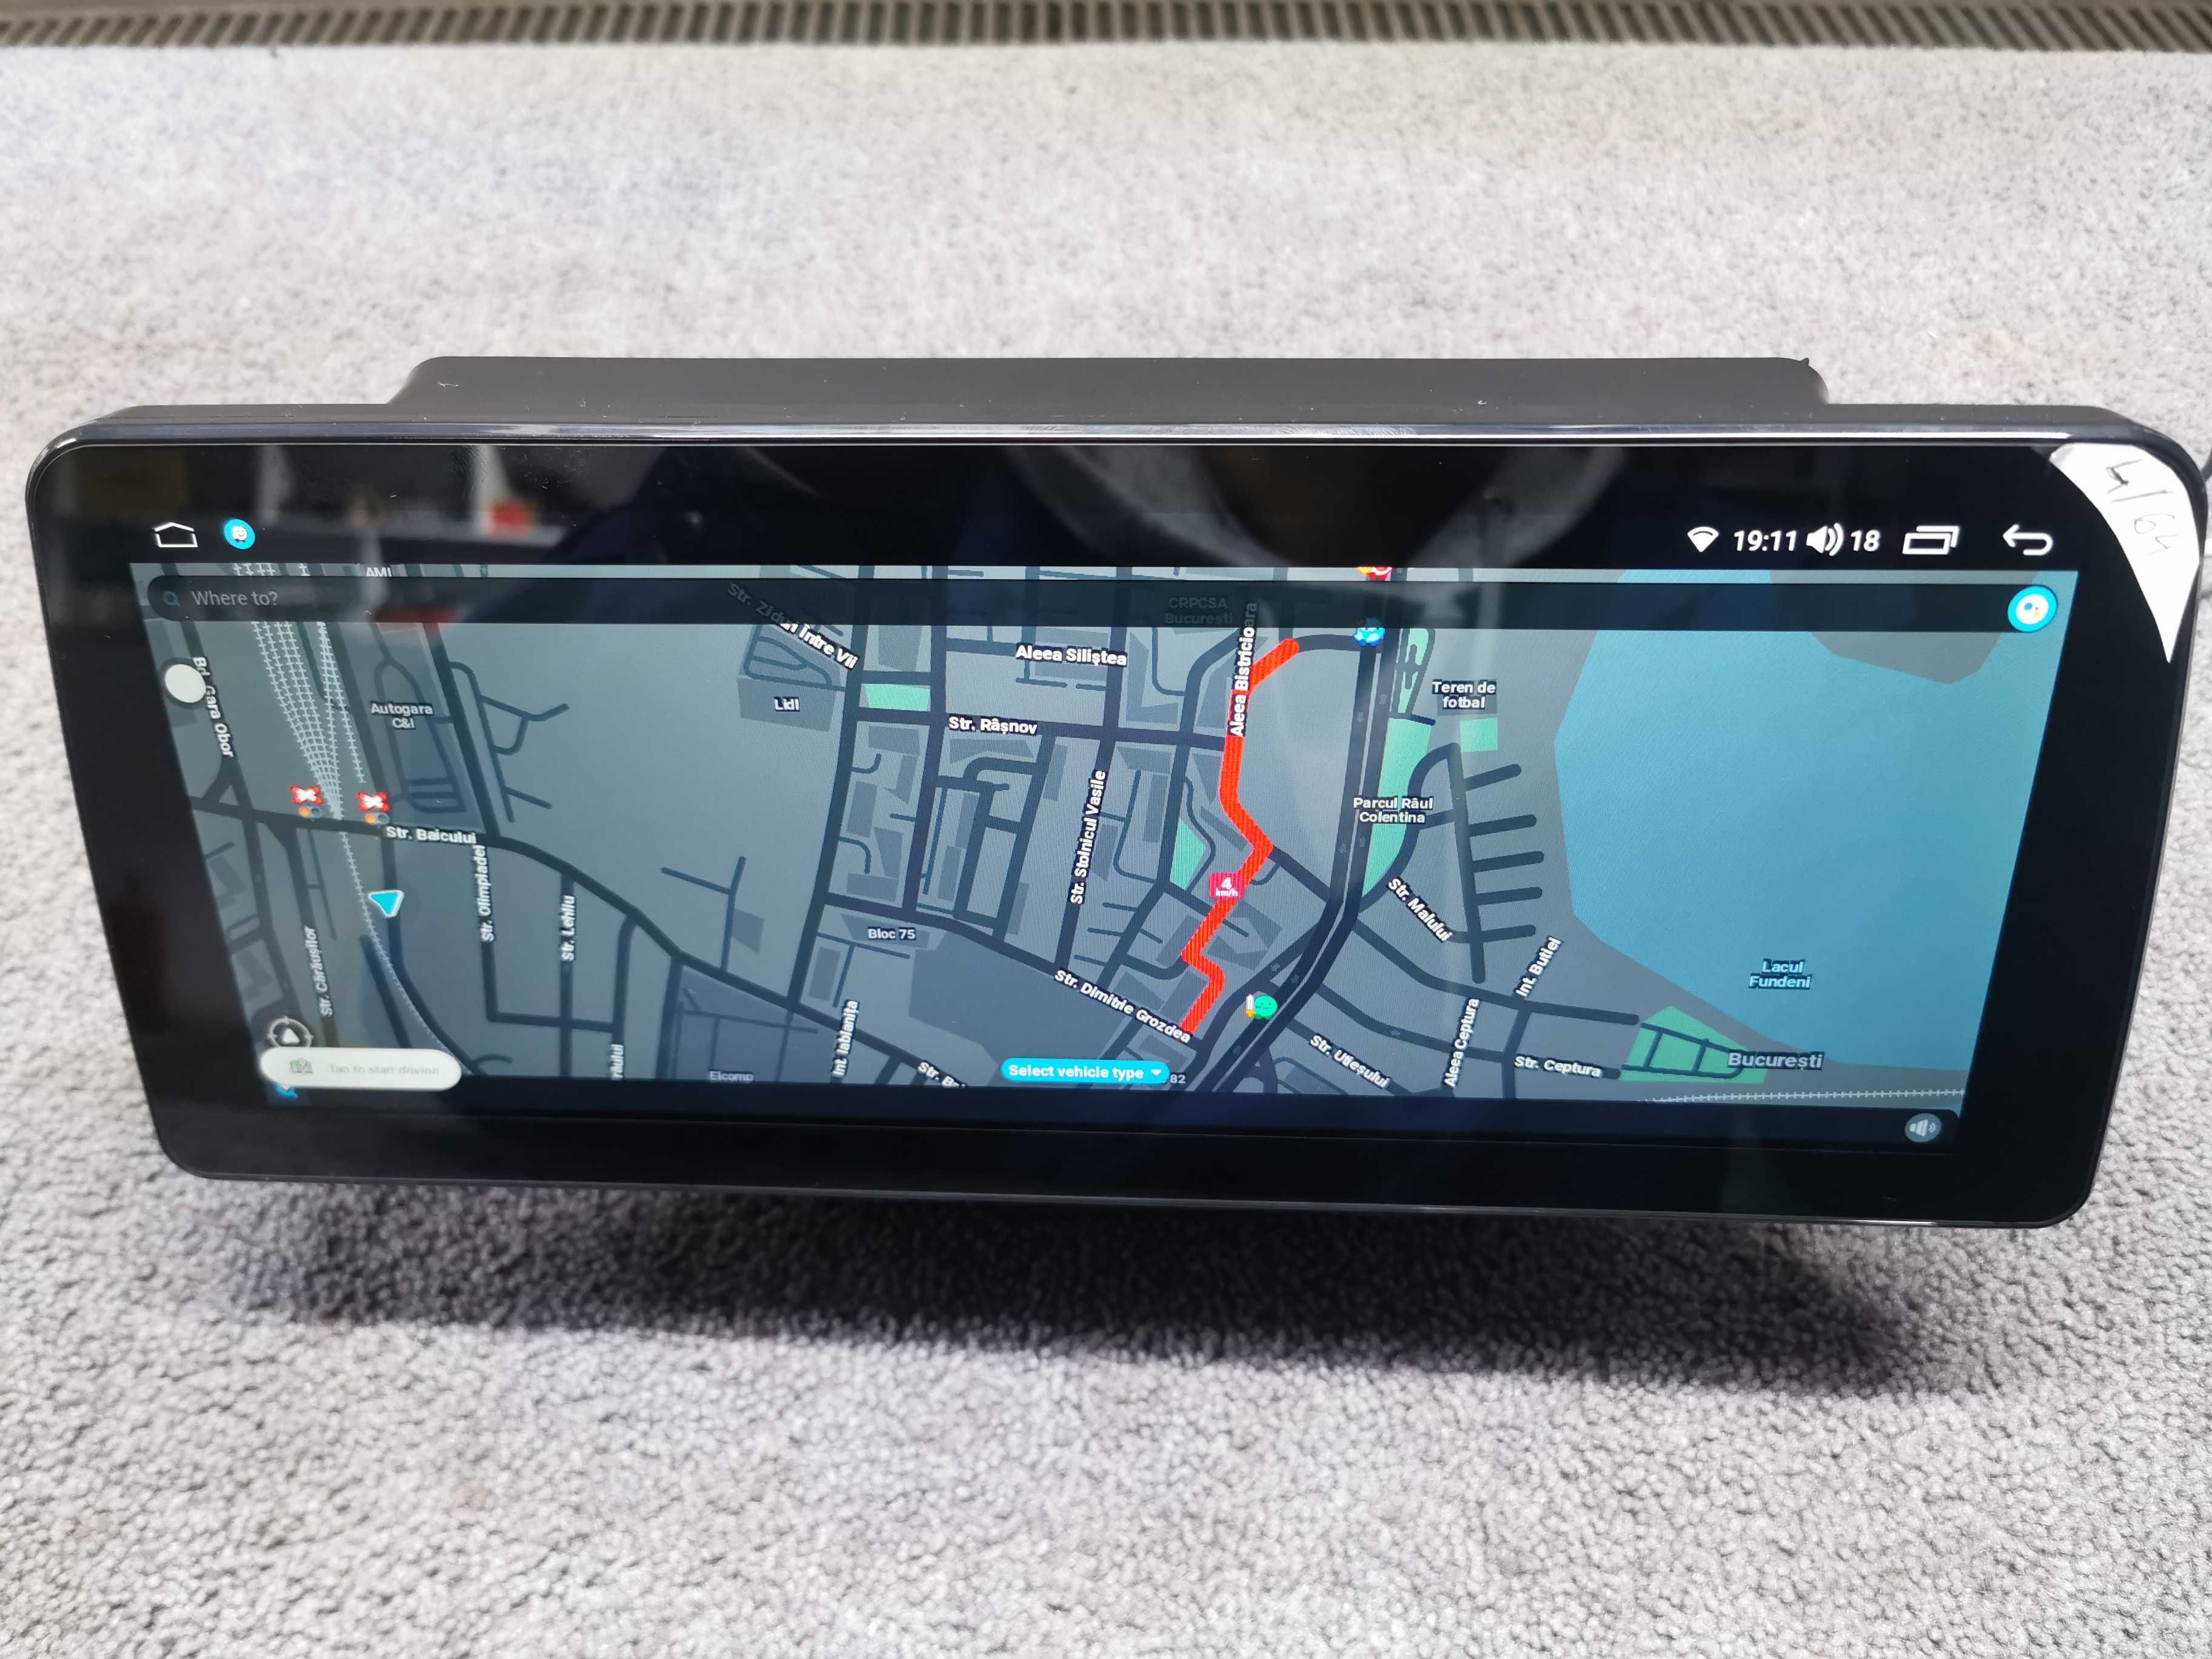 Navigatie Android Hyundai I30 2012-2017 OCTACORE 4/64GB 12.3 INCH